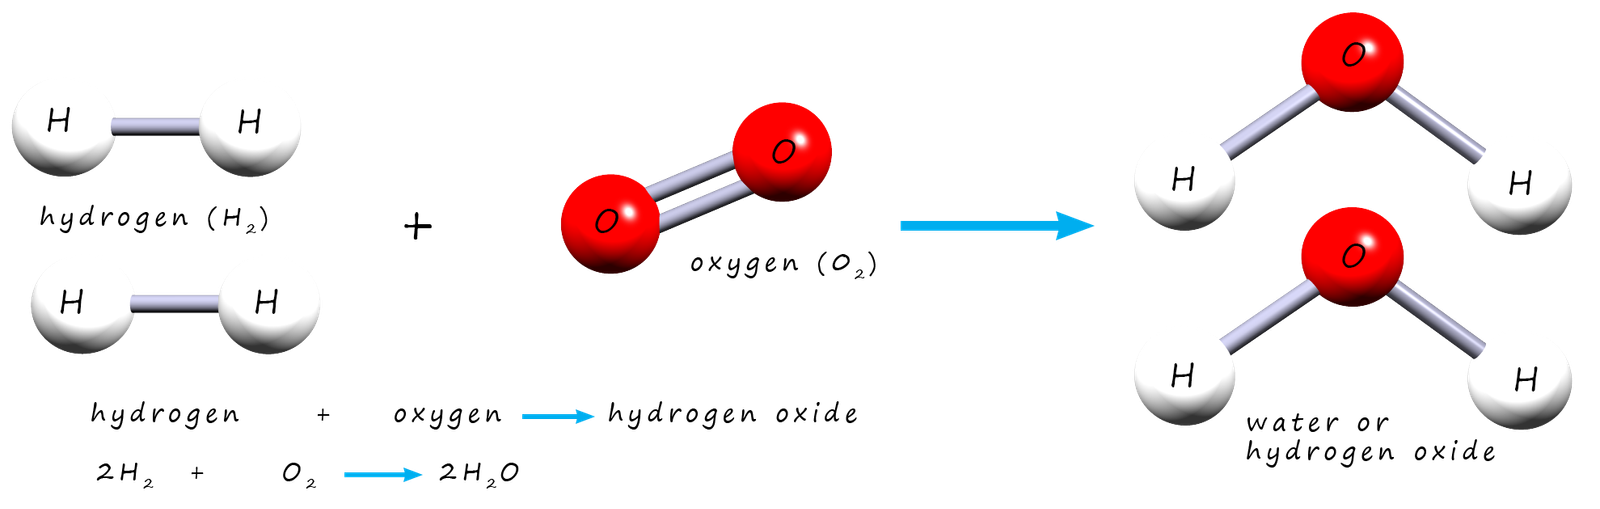 3d  model equation to show hydrogen reacting with oxygen to form water.